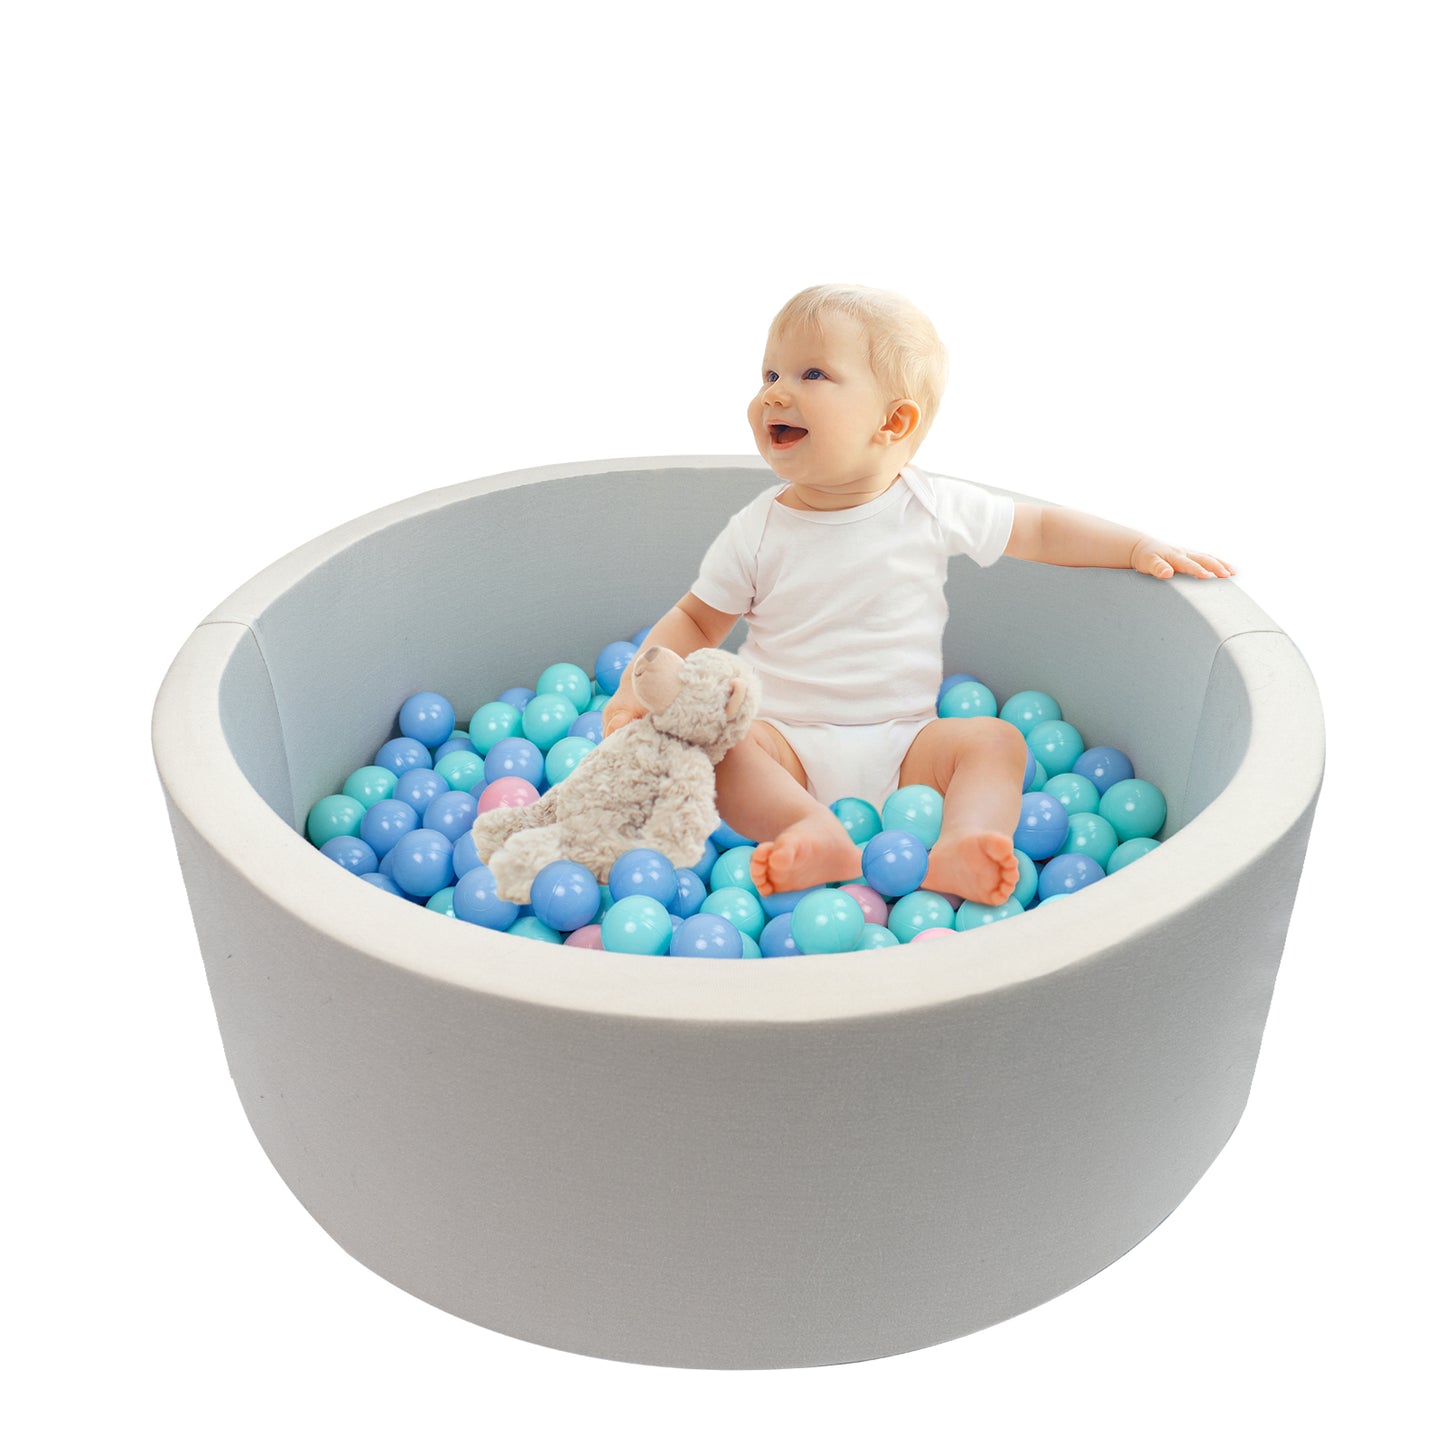 XJD Large Foam Ball Pit for Children Toddlers, 47.2” Soft Round Ball Pits for Kids with 200 Colored 2.2" Plastic Balls, Baby Playpen Ball Pool, Ideal Gift for Indoor and Outdoor Game